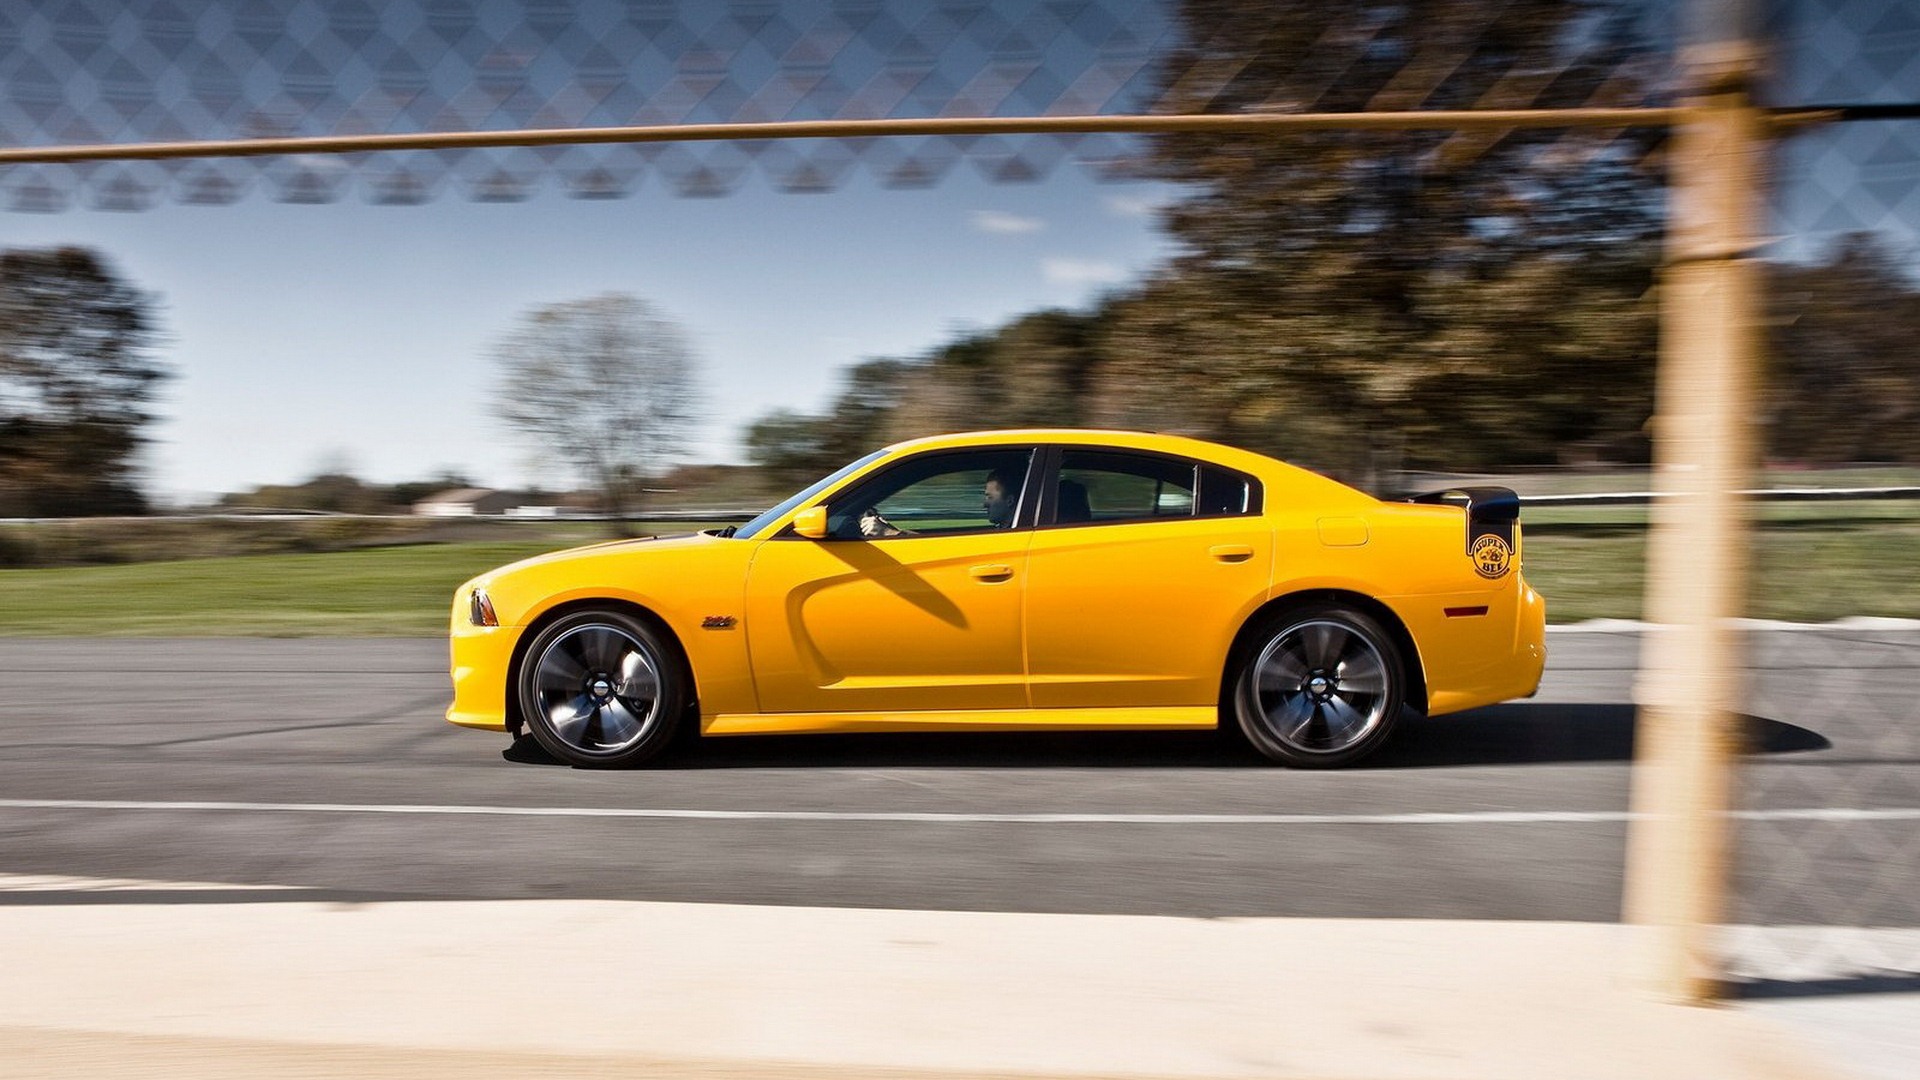 Dodge Charger sports car HD wallpapers #8 - 1920x1080